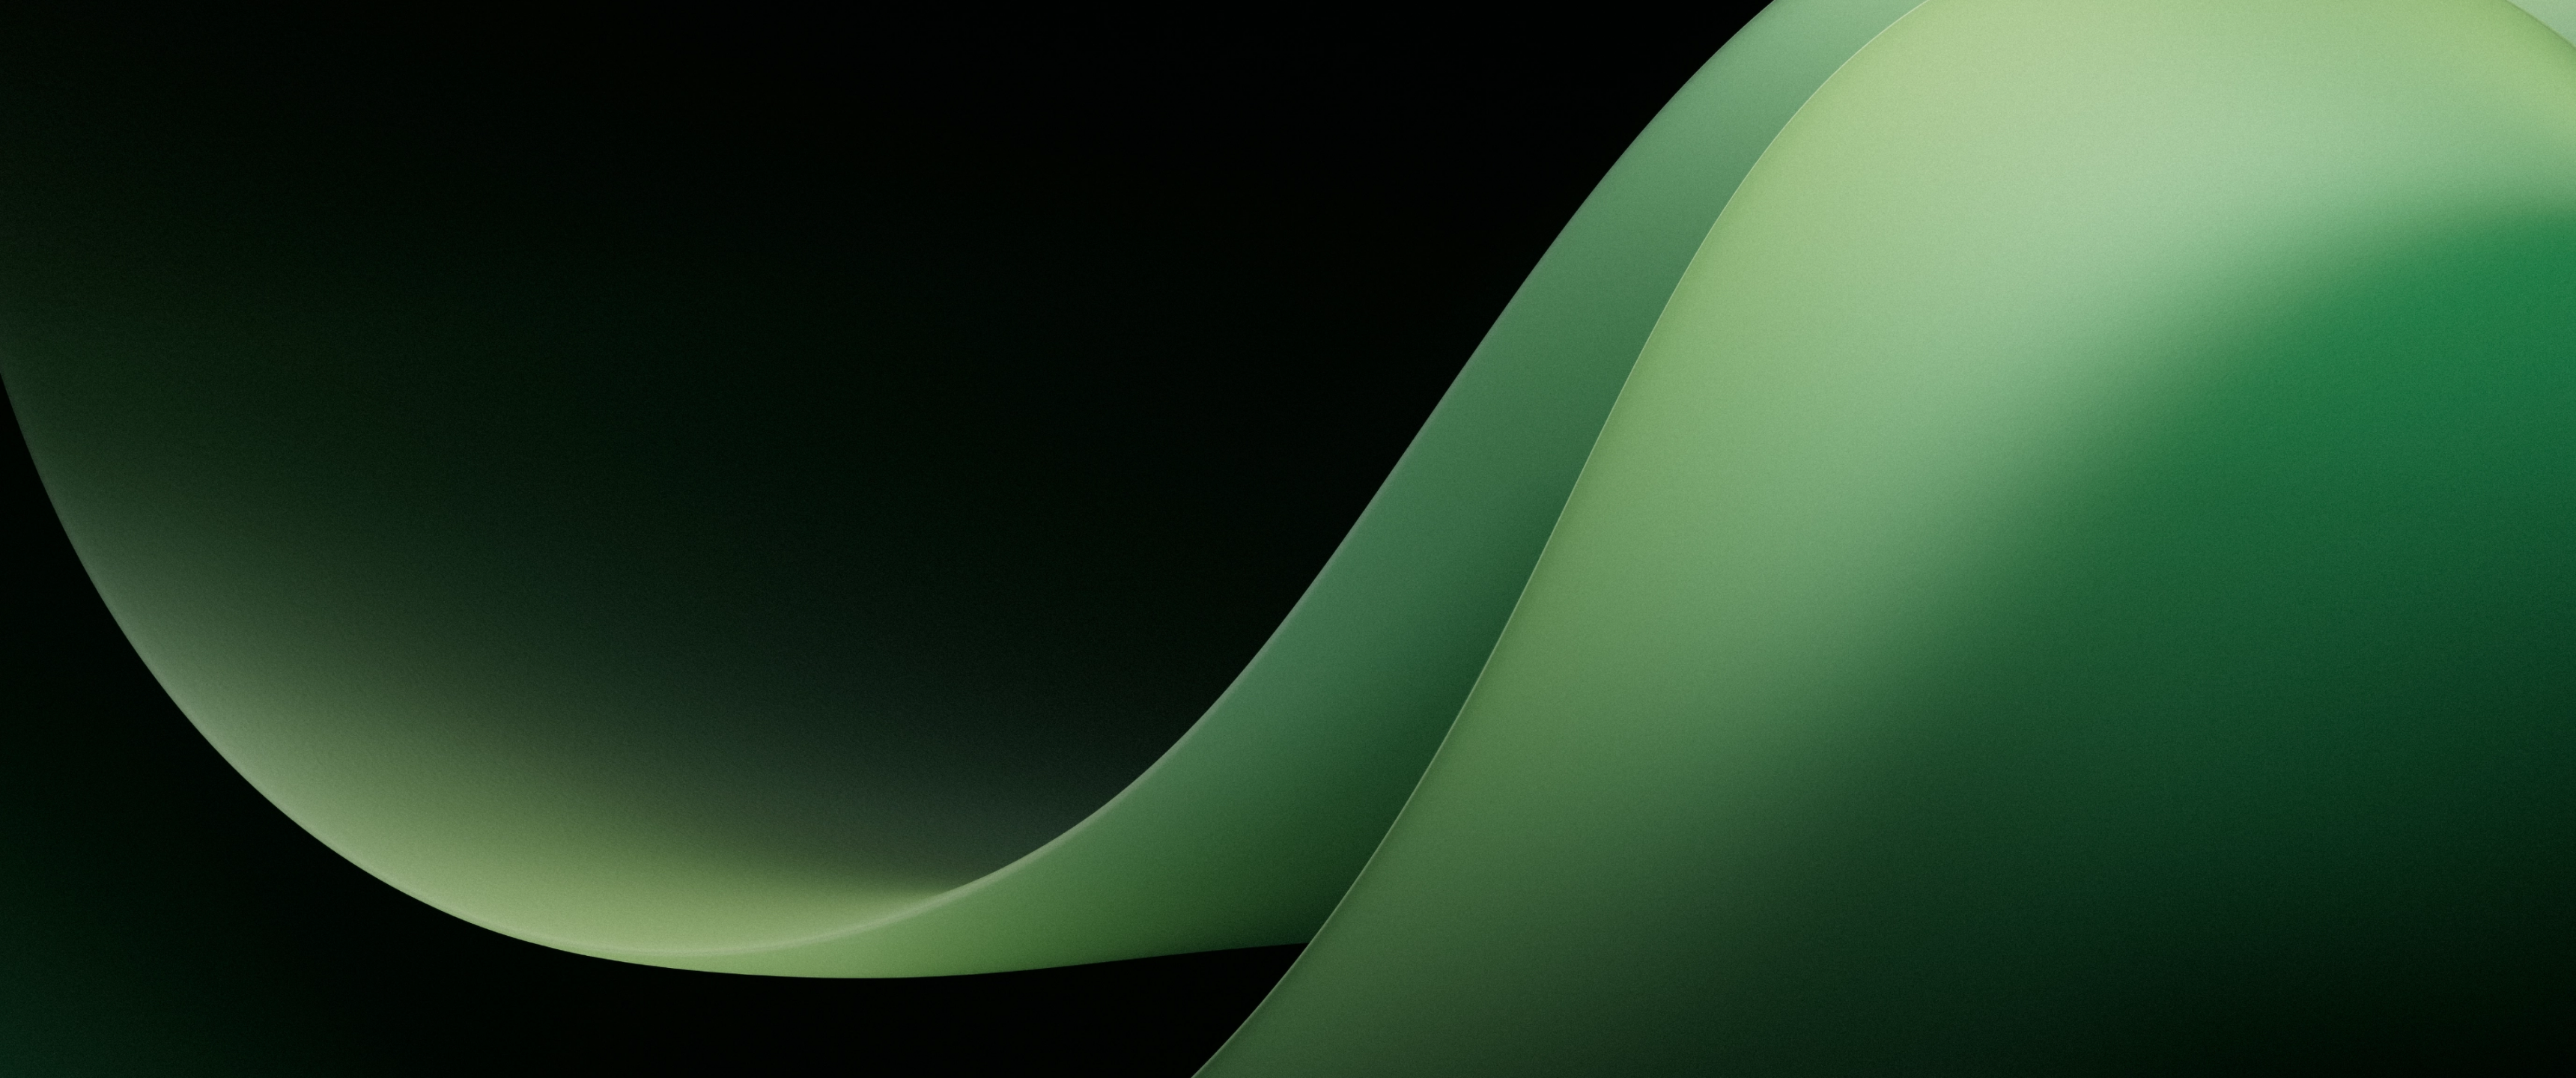 Microsoft Surface Duo 2 Wallpaper 4K, Green background, Abstract, #9238